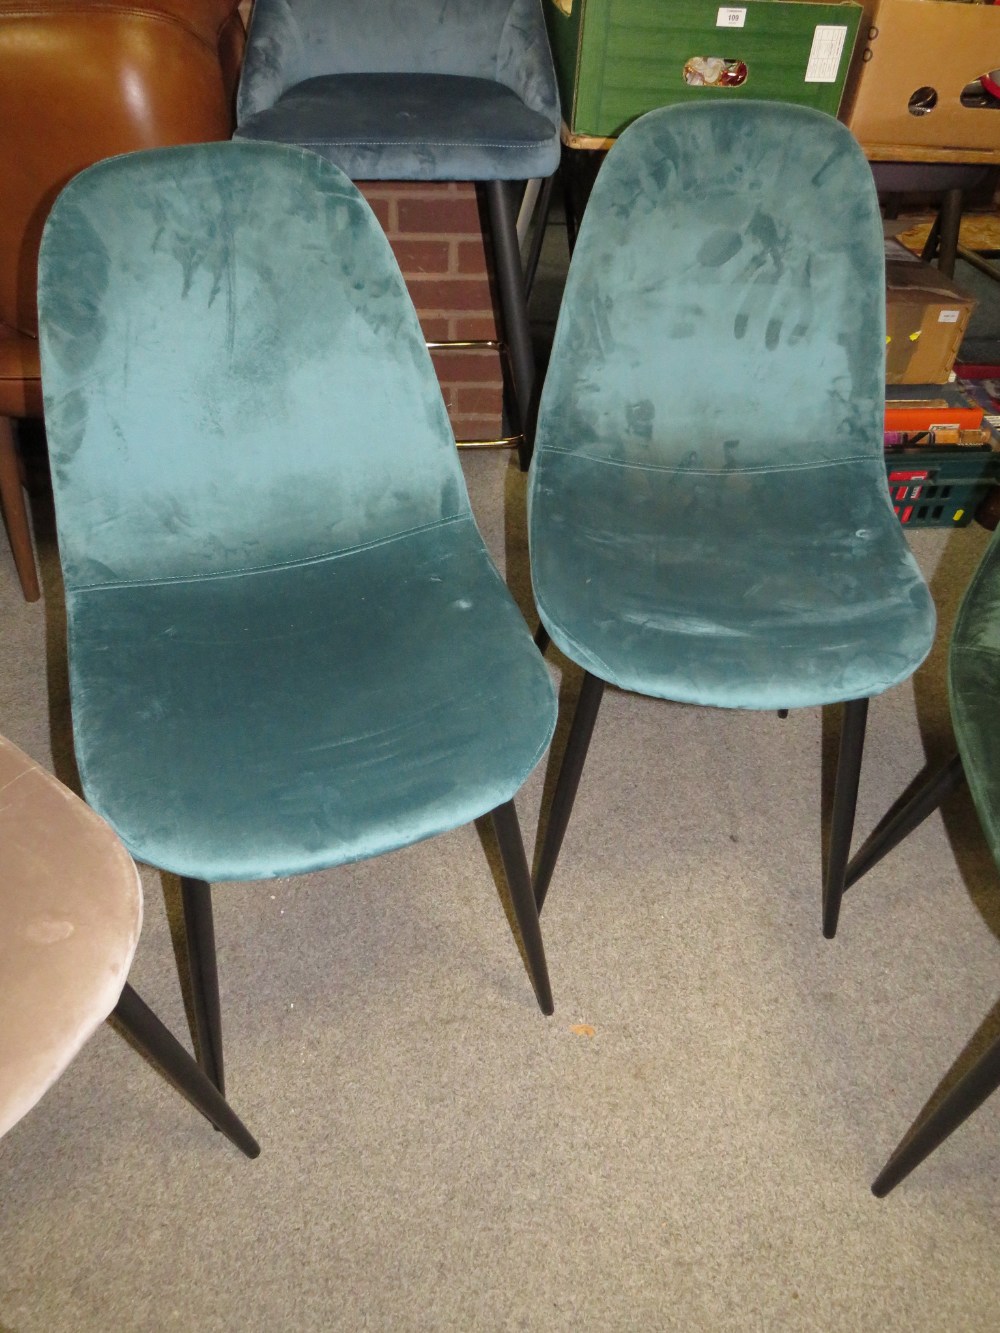 A MODERN HARLEQUIN SET OF FIVE DINING CHAIRS - Image 3 of 5